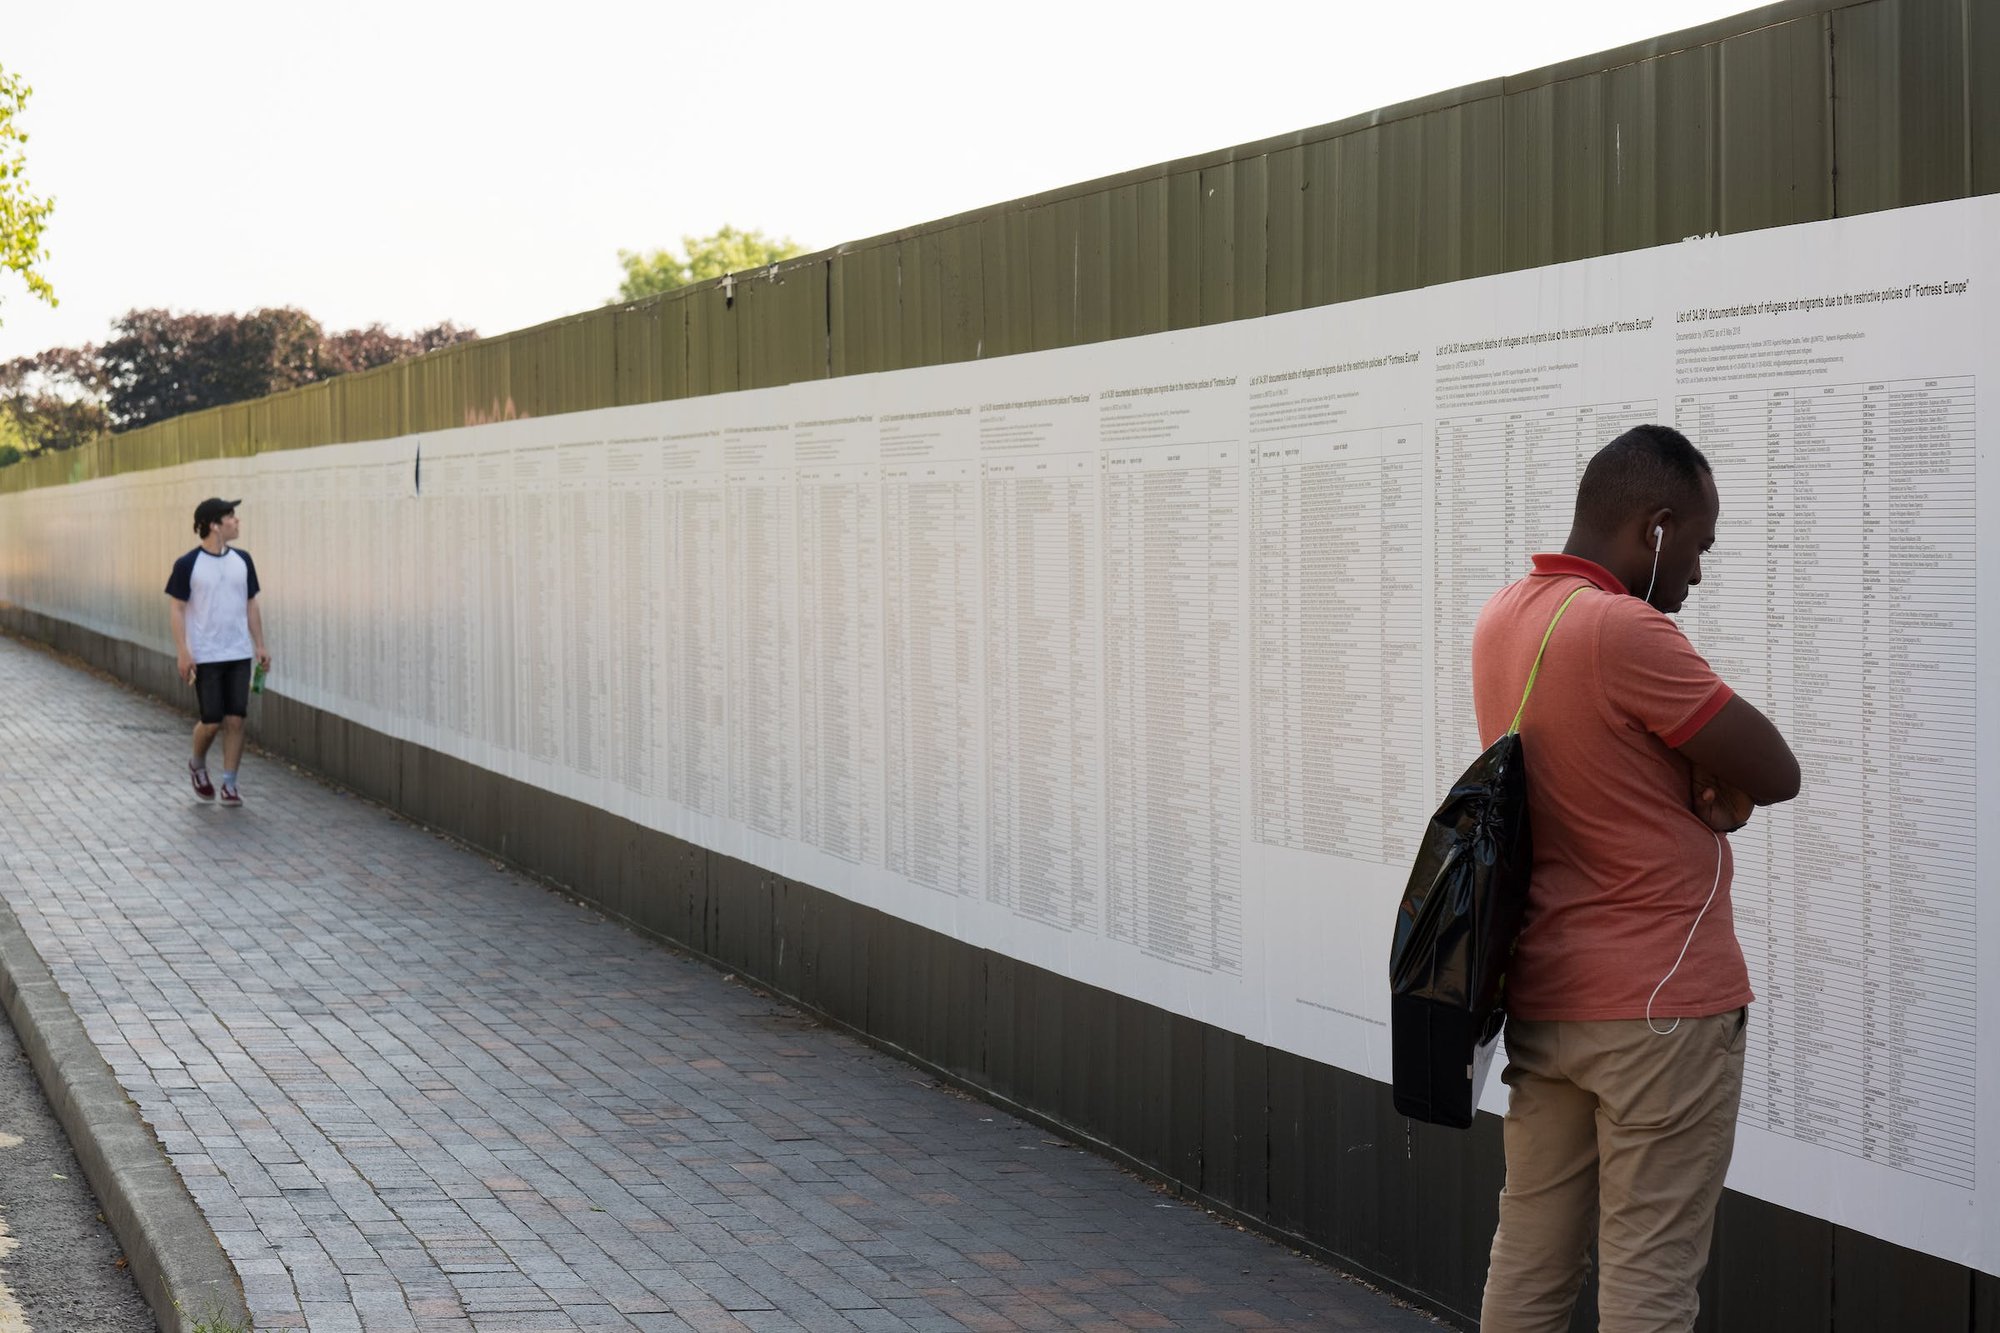 Banu Cennetoğlu, The List, list of 34,361 documented deaths of asylum seekers, refugees and migrants who have lost their lives within or on the borders of Europe since 1993. Documentation as of 5 May 2018 by UNITED for Intercultural Action. Installation view, The List, Great George Street, Liverpool Biennial, 2018